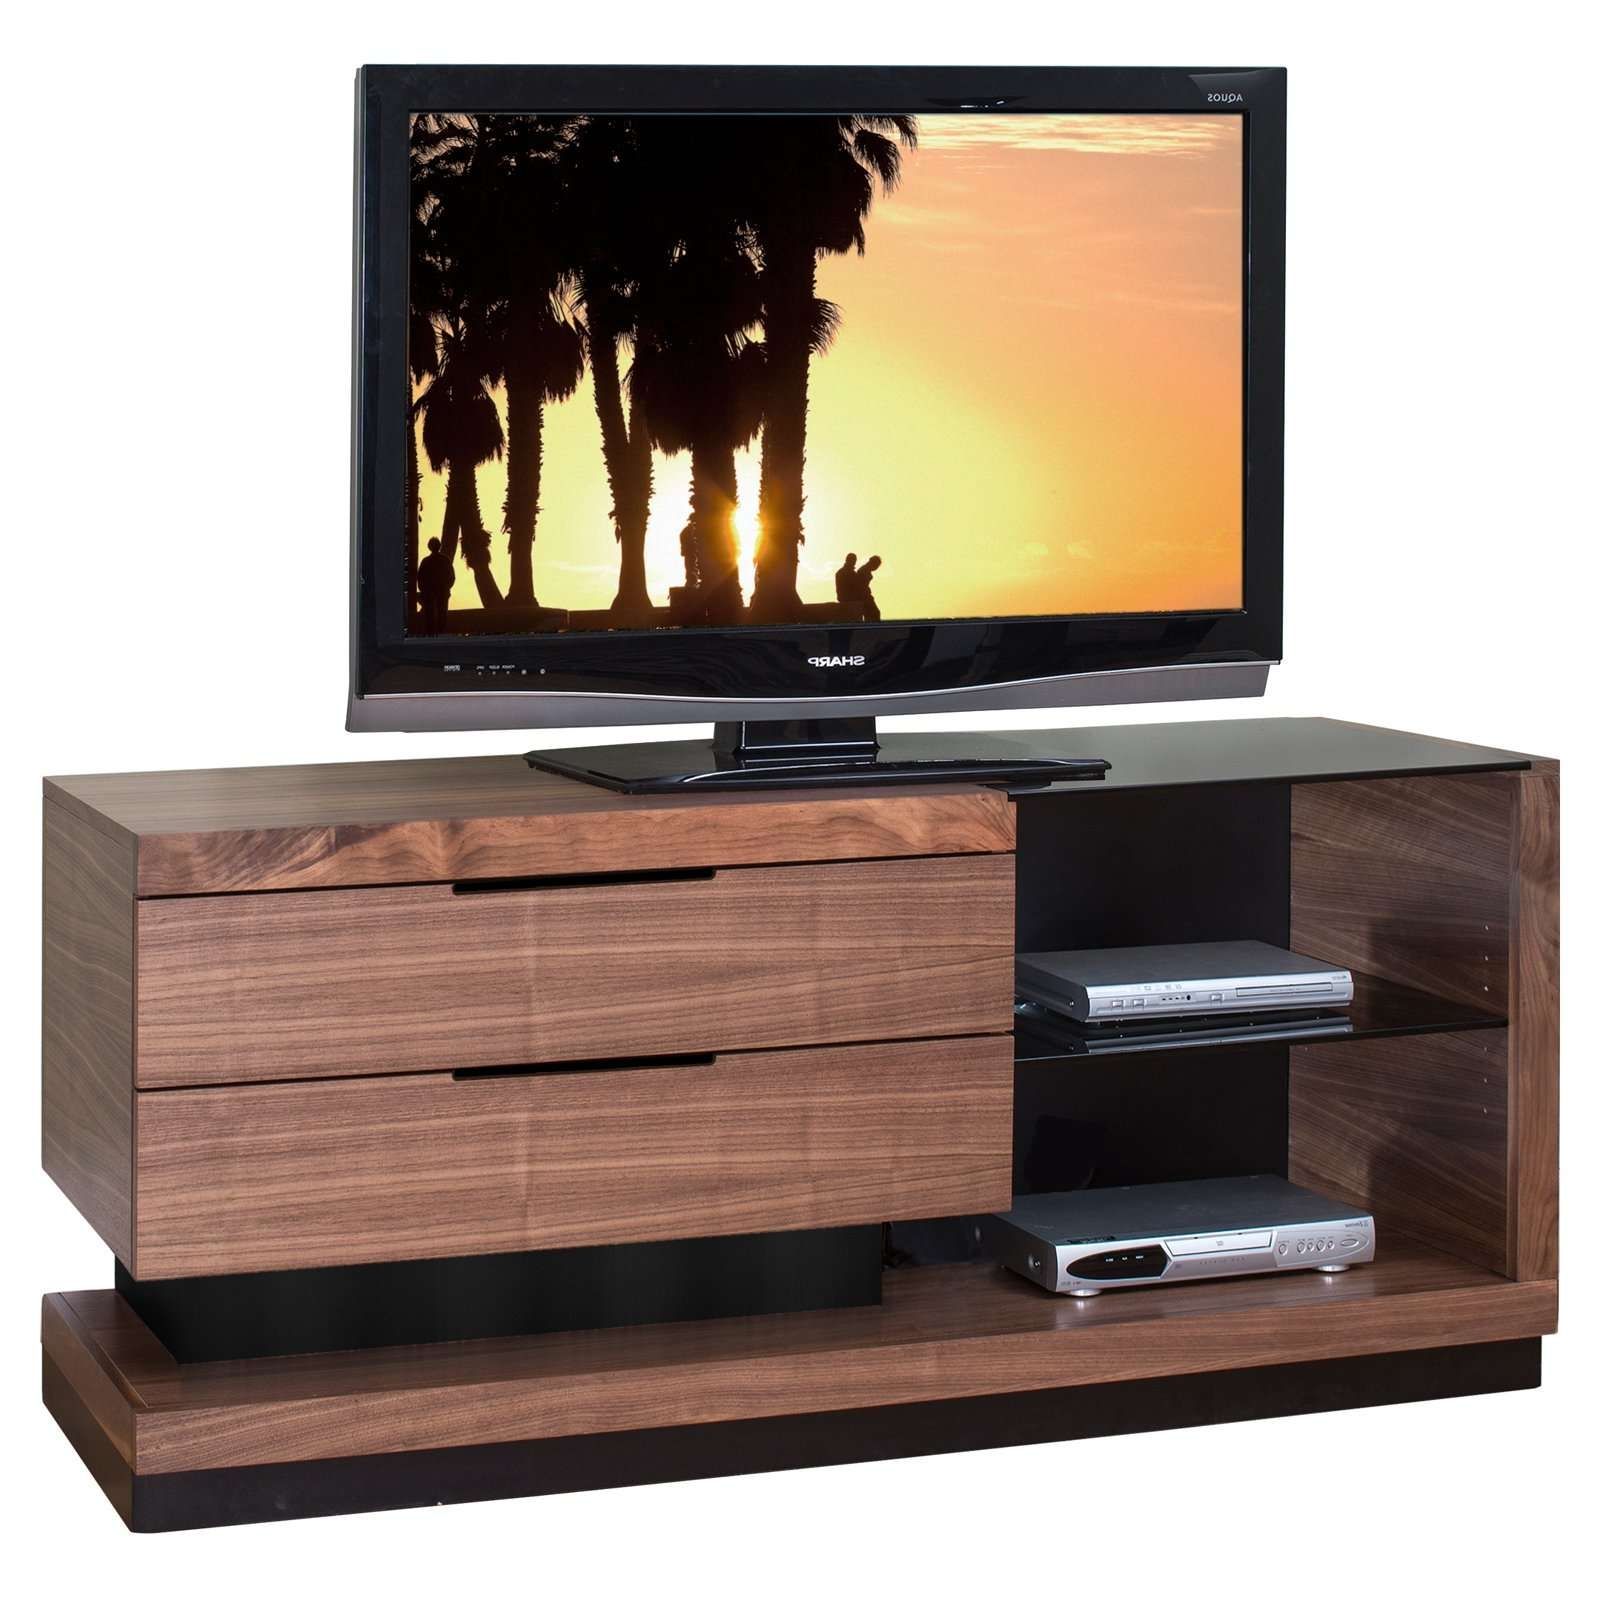 Tv : Alluring Wooden Tv Stand Olx Captivating Wood Tv Stands Argos For Cheap Wood Tv Stands (View 11 of 15)